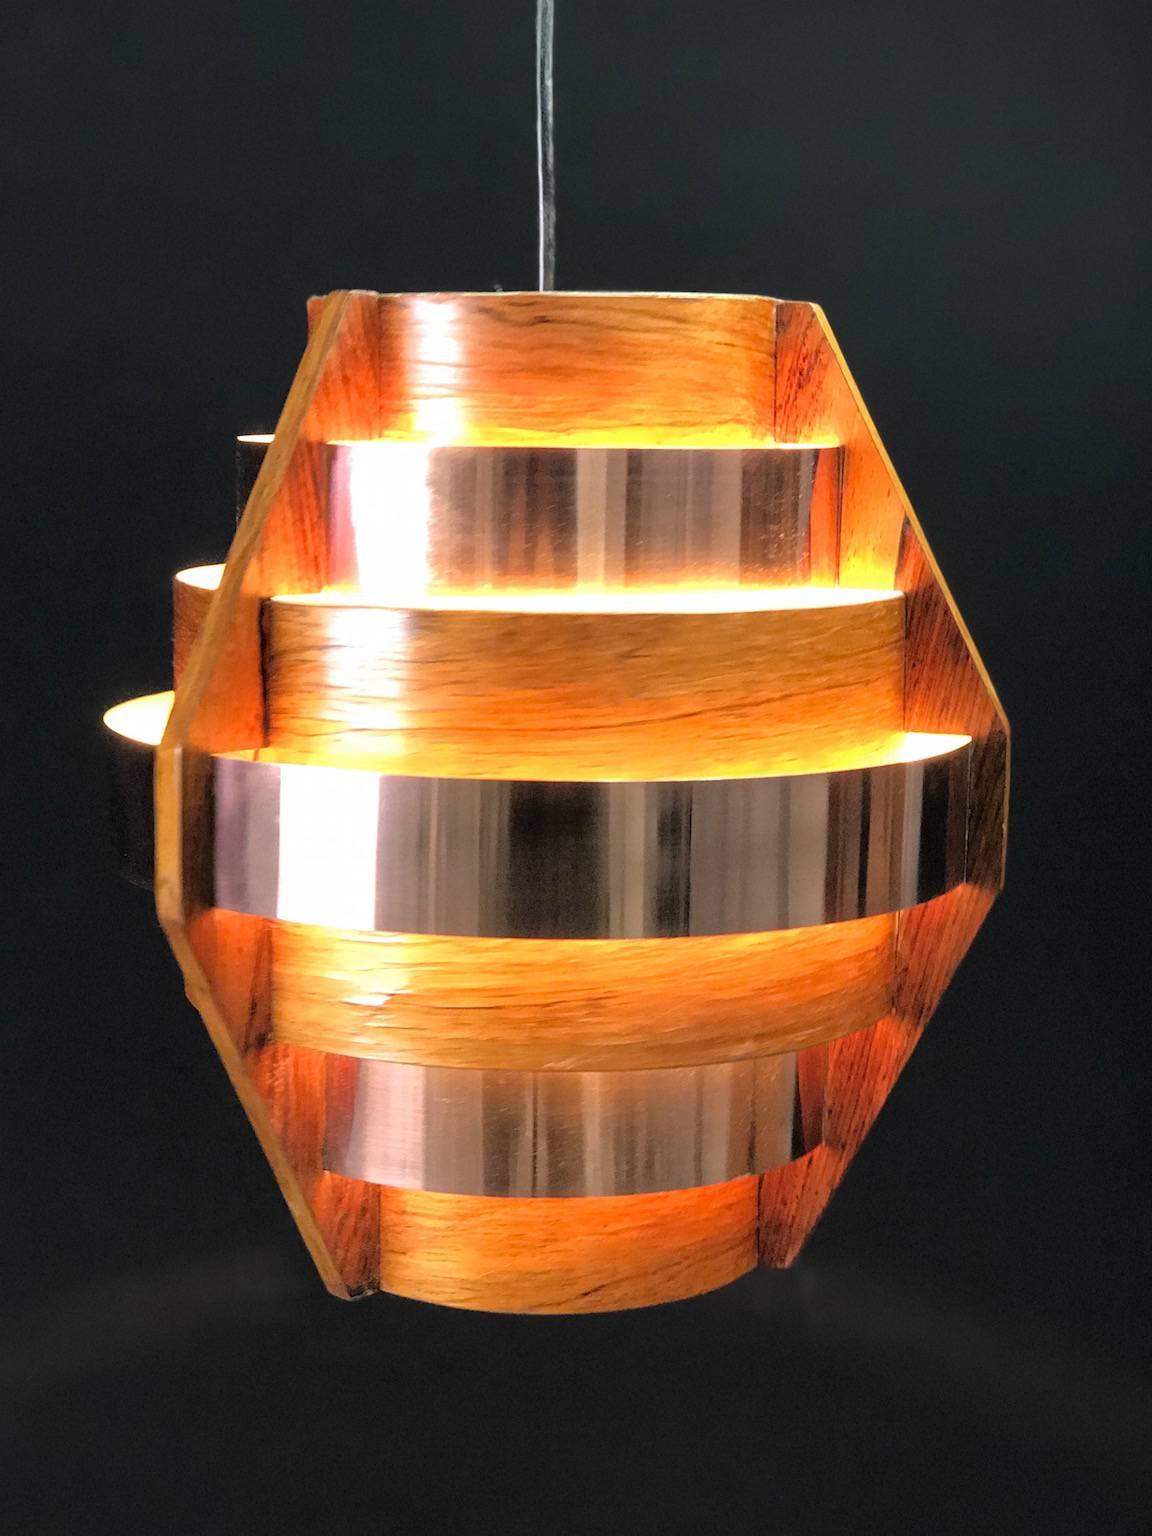 Walnut veneer and three massive copper rings is what makes this stunning piece of Scandinavian Mid-Century design.

Condition: Few age related signs such as small pieces of veneer missing which doesn´t effect the overall beauty of the pendant.